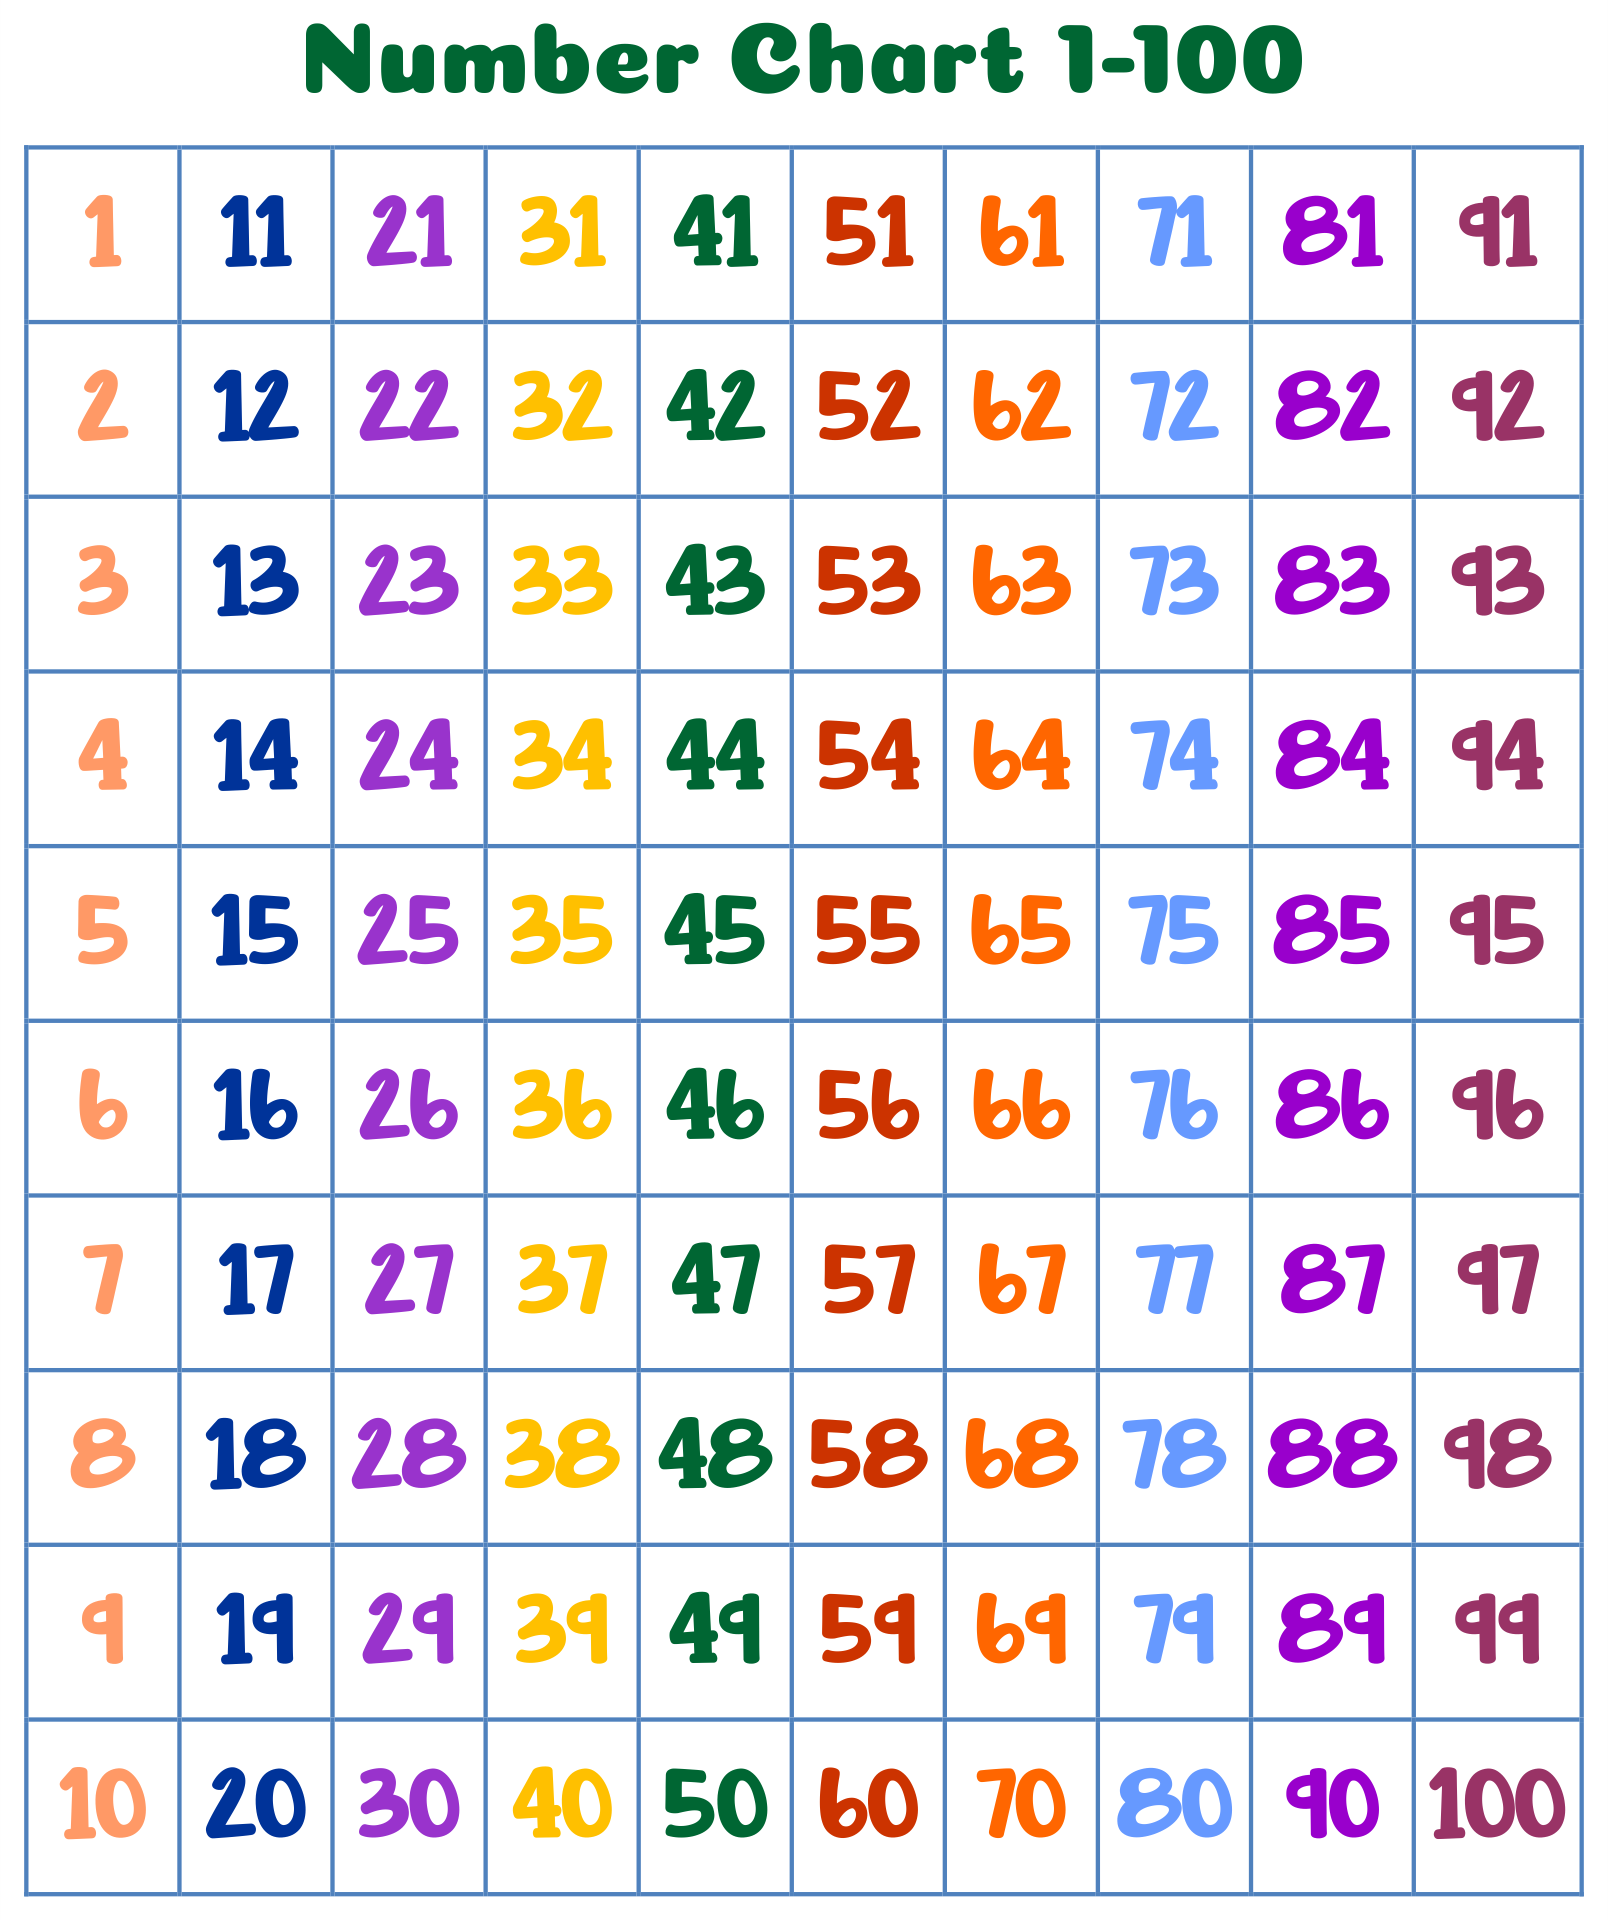 6-best-images-of-1-100-chart-printable-printable-number-chart-1-100-large-printable-numbers